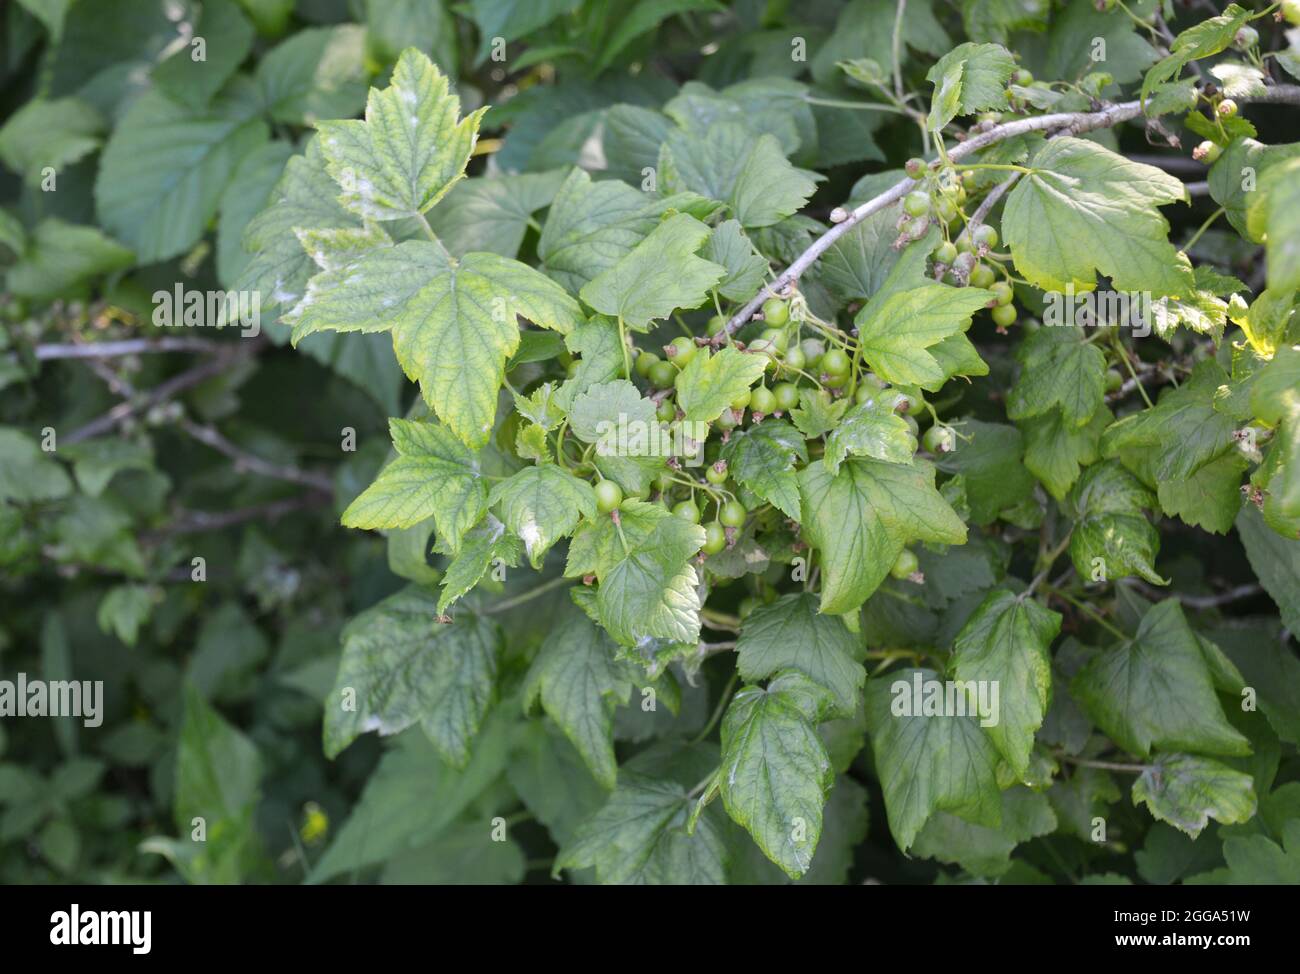 Black currant bush with downy mildew, powdery mildew disease on the leaves  in a wet season Stock Photo